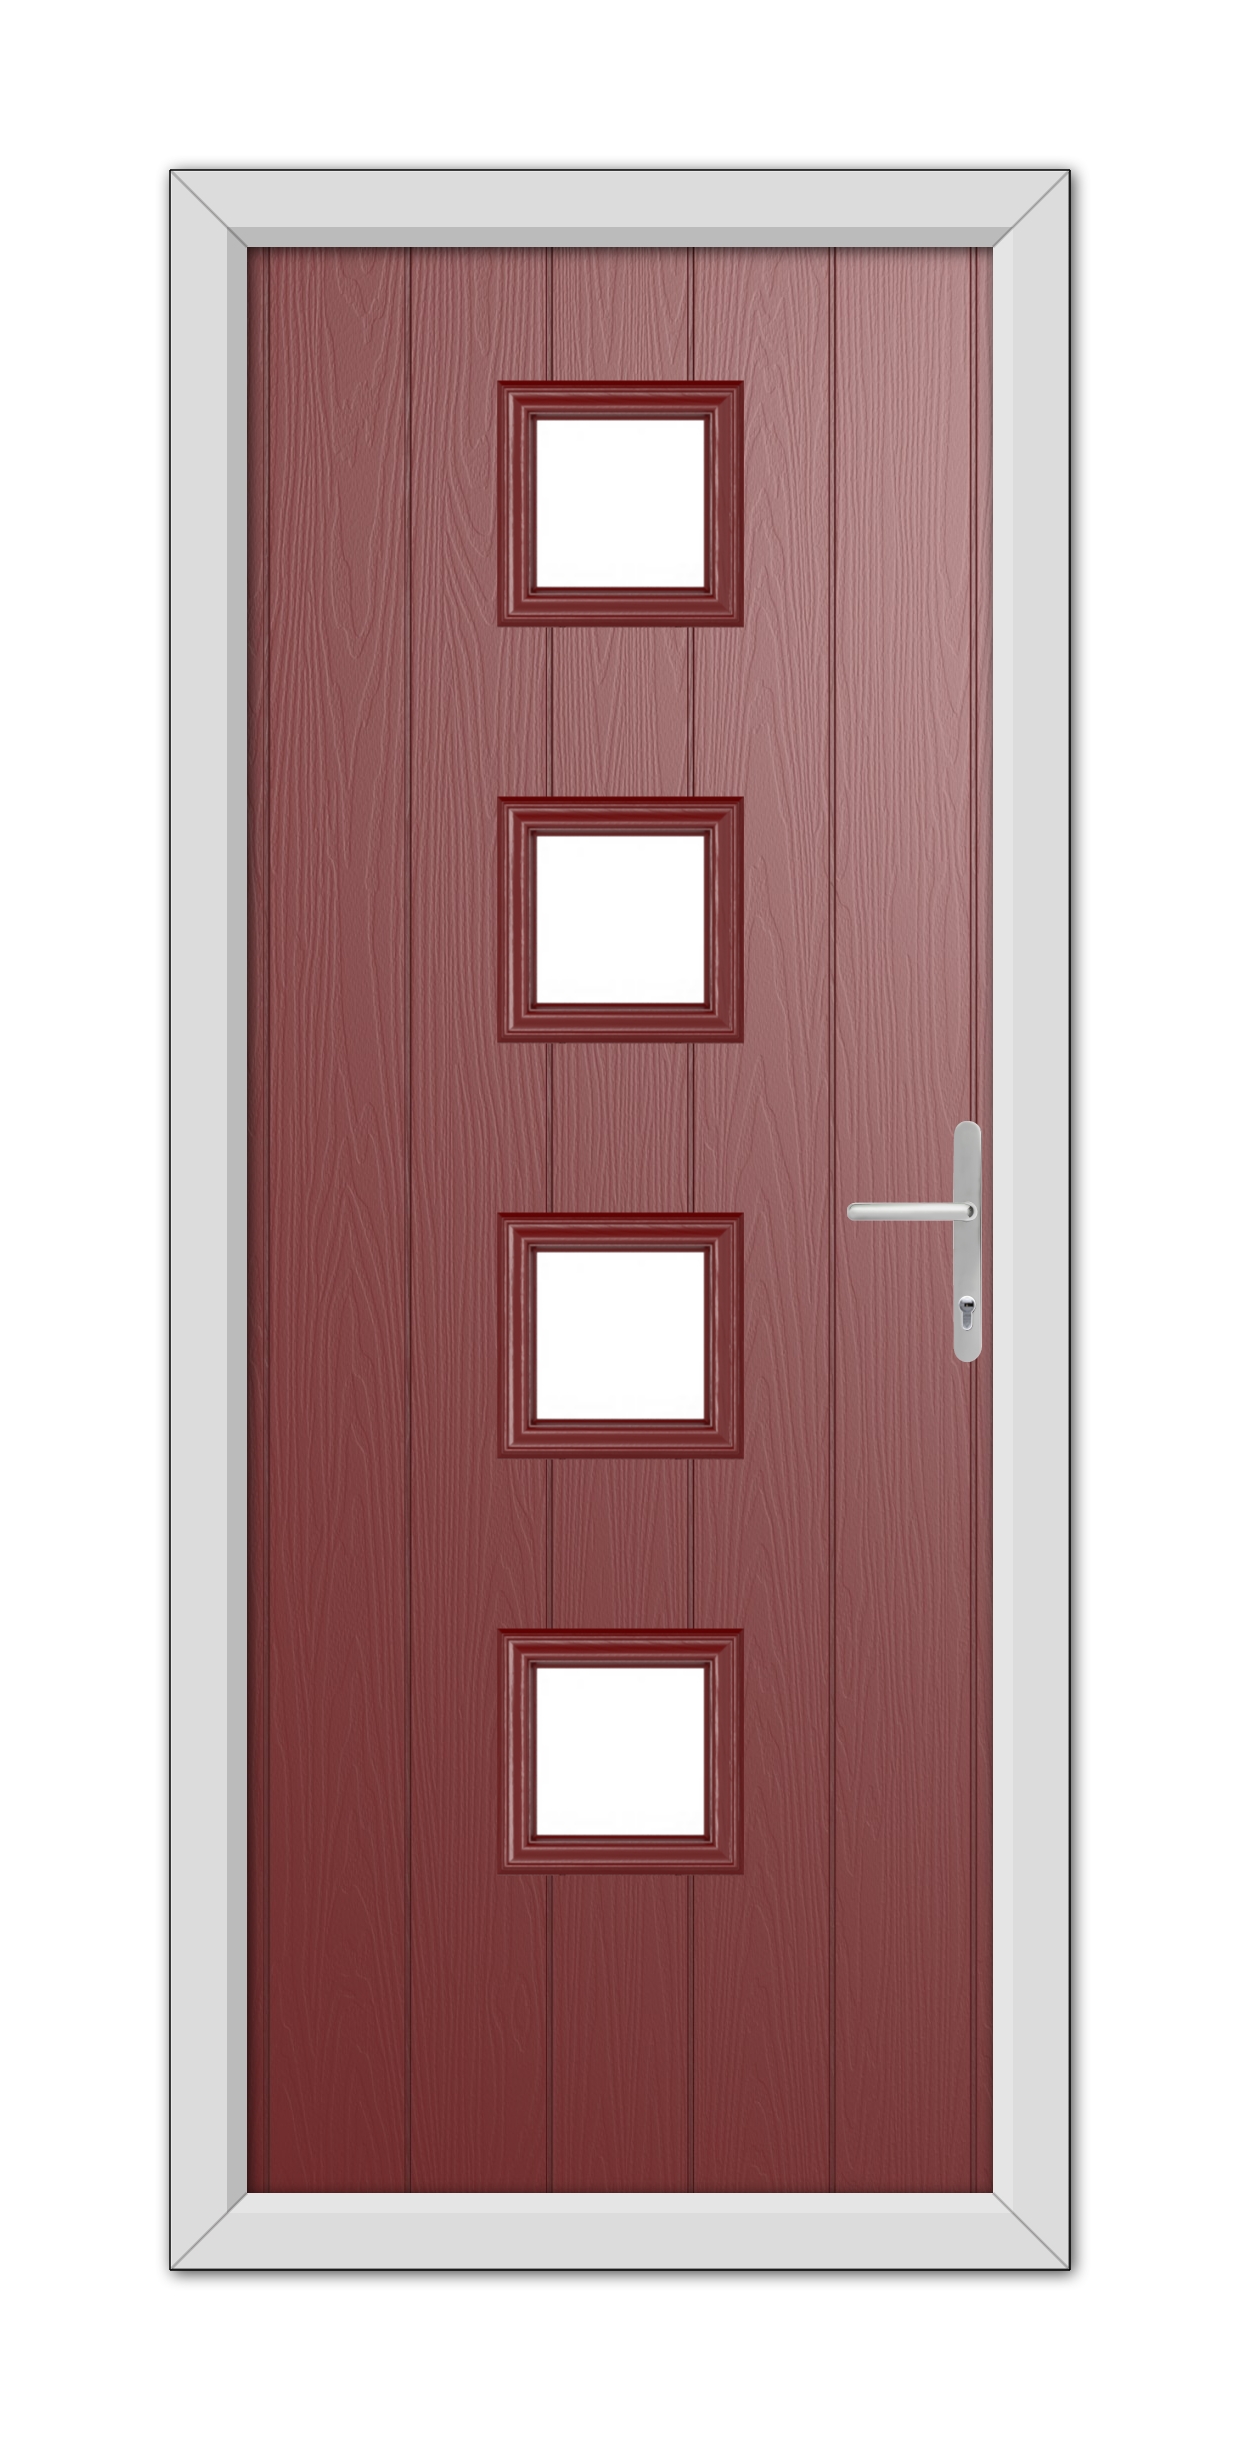 A modern Red Hamilton Composite Door 48mm Timber Core with four rectangular windows and a silver handle, set in a white frame.